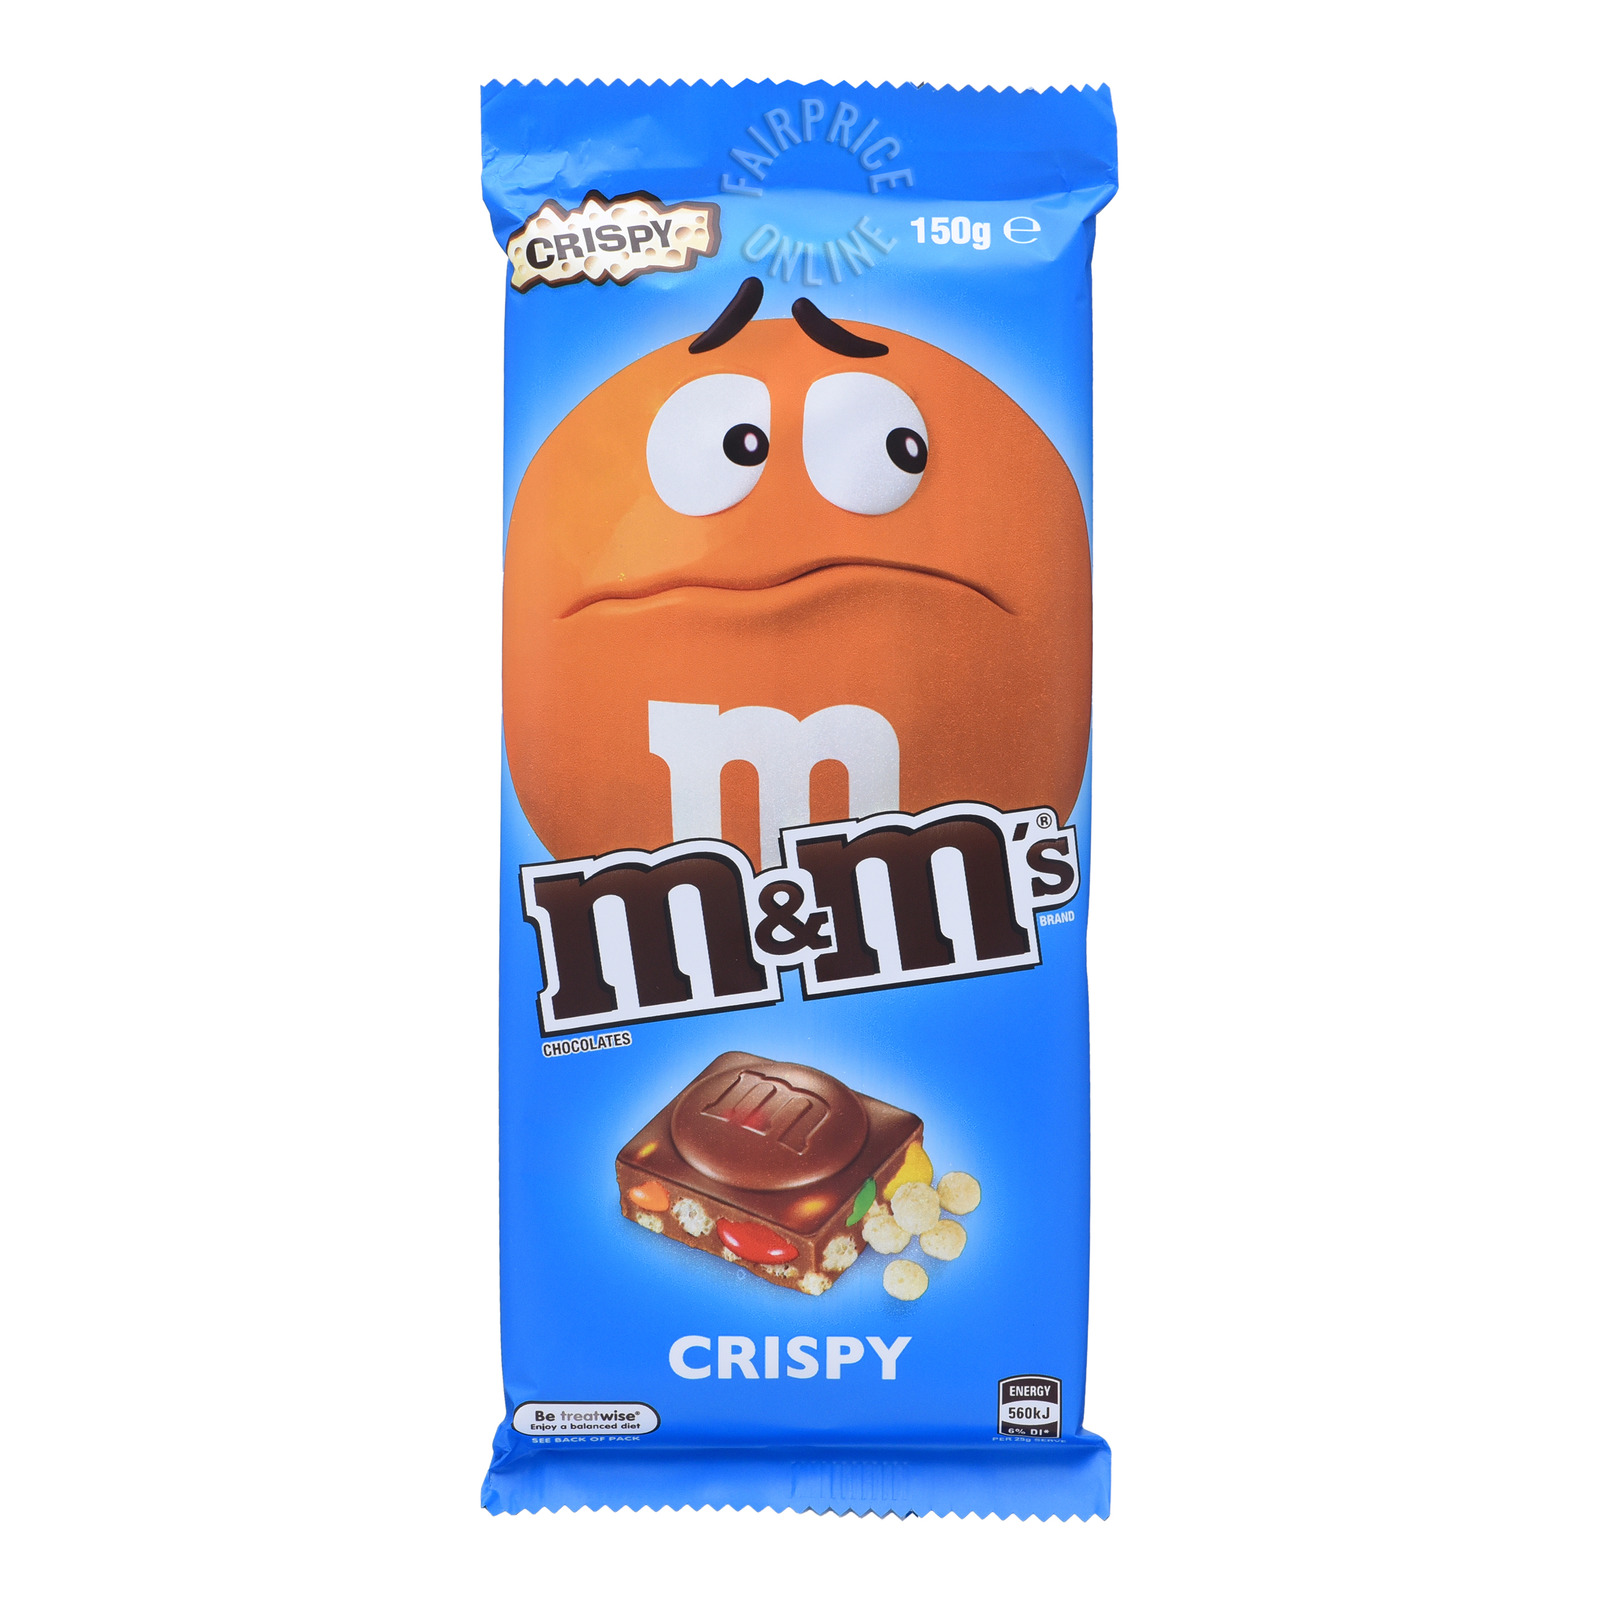 M&M’s Chocolate Bars now available at FairPrice for $4.40 - 5